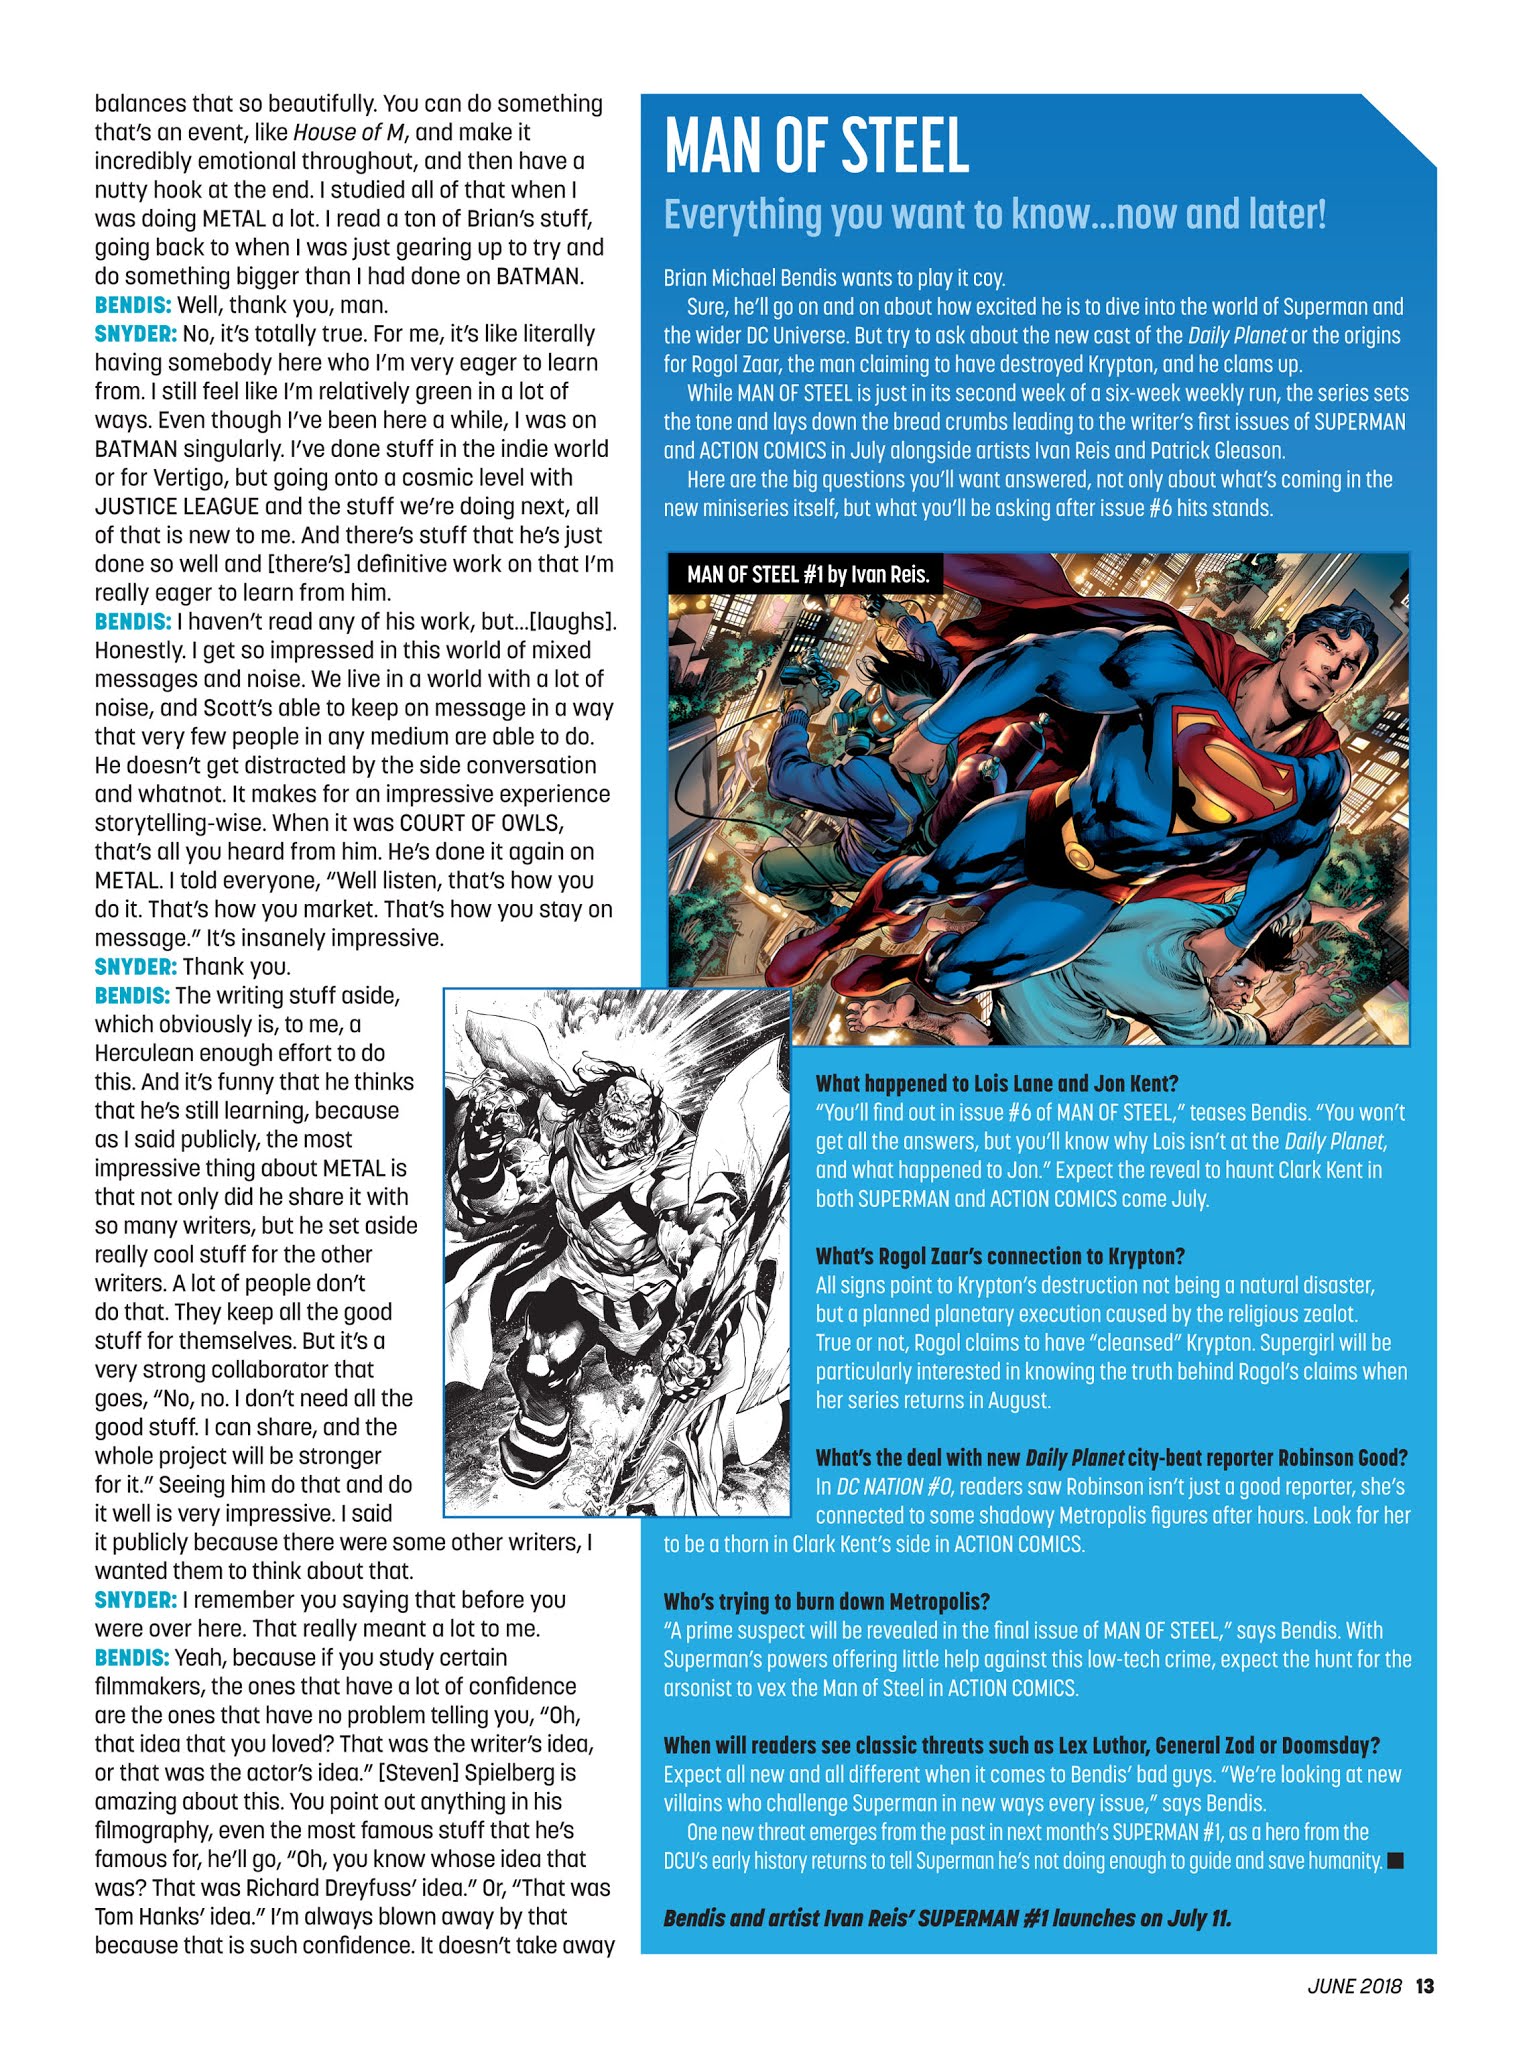 Read online DC Nation comic -  Issue #1 - 14